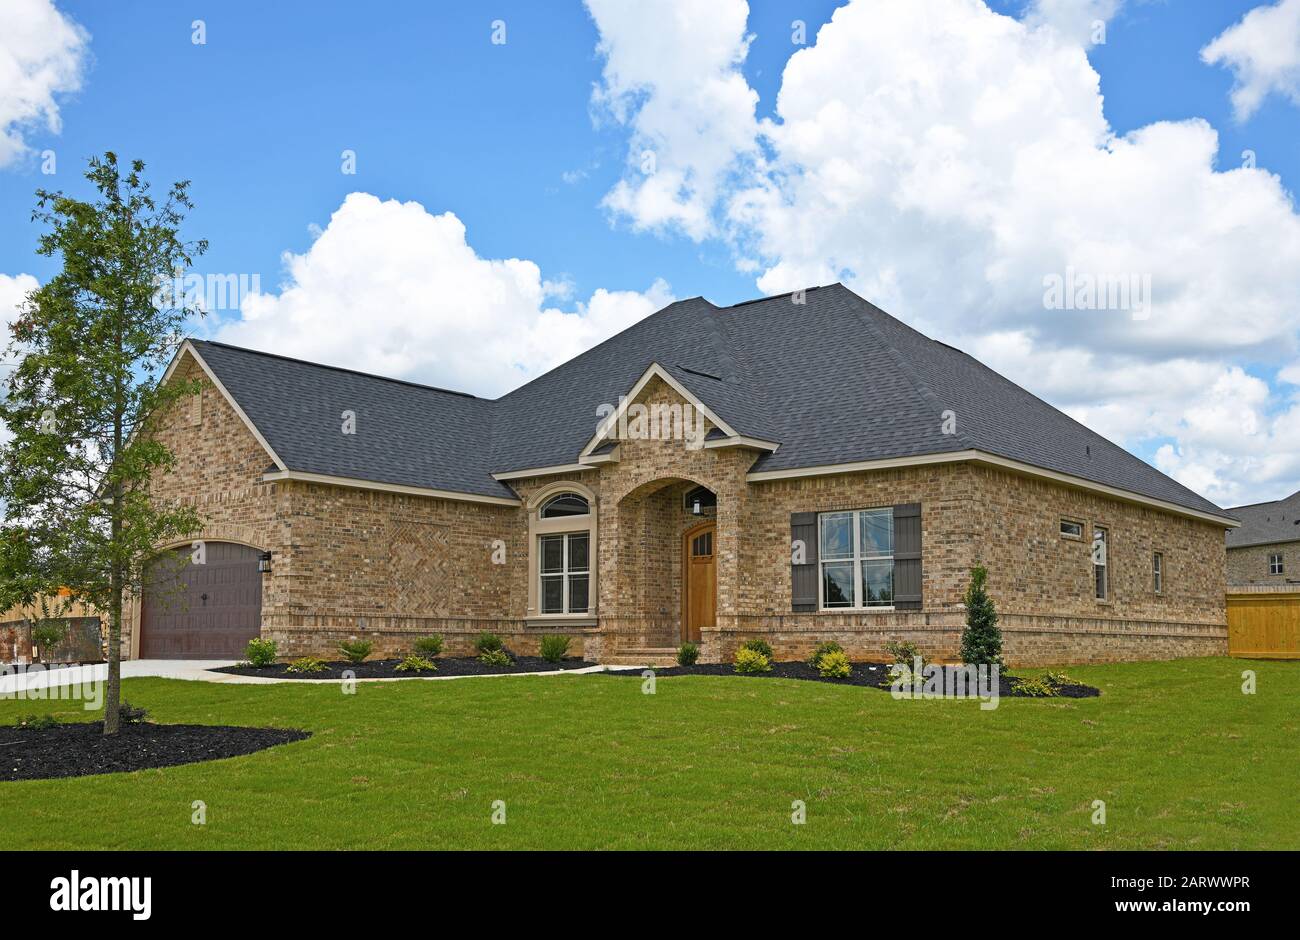 A New Brick House in a Subdivision For Sale Stock Photo